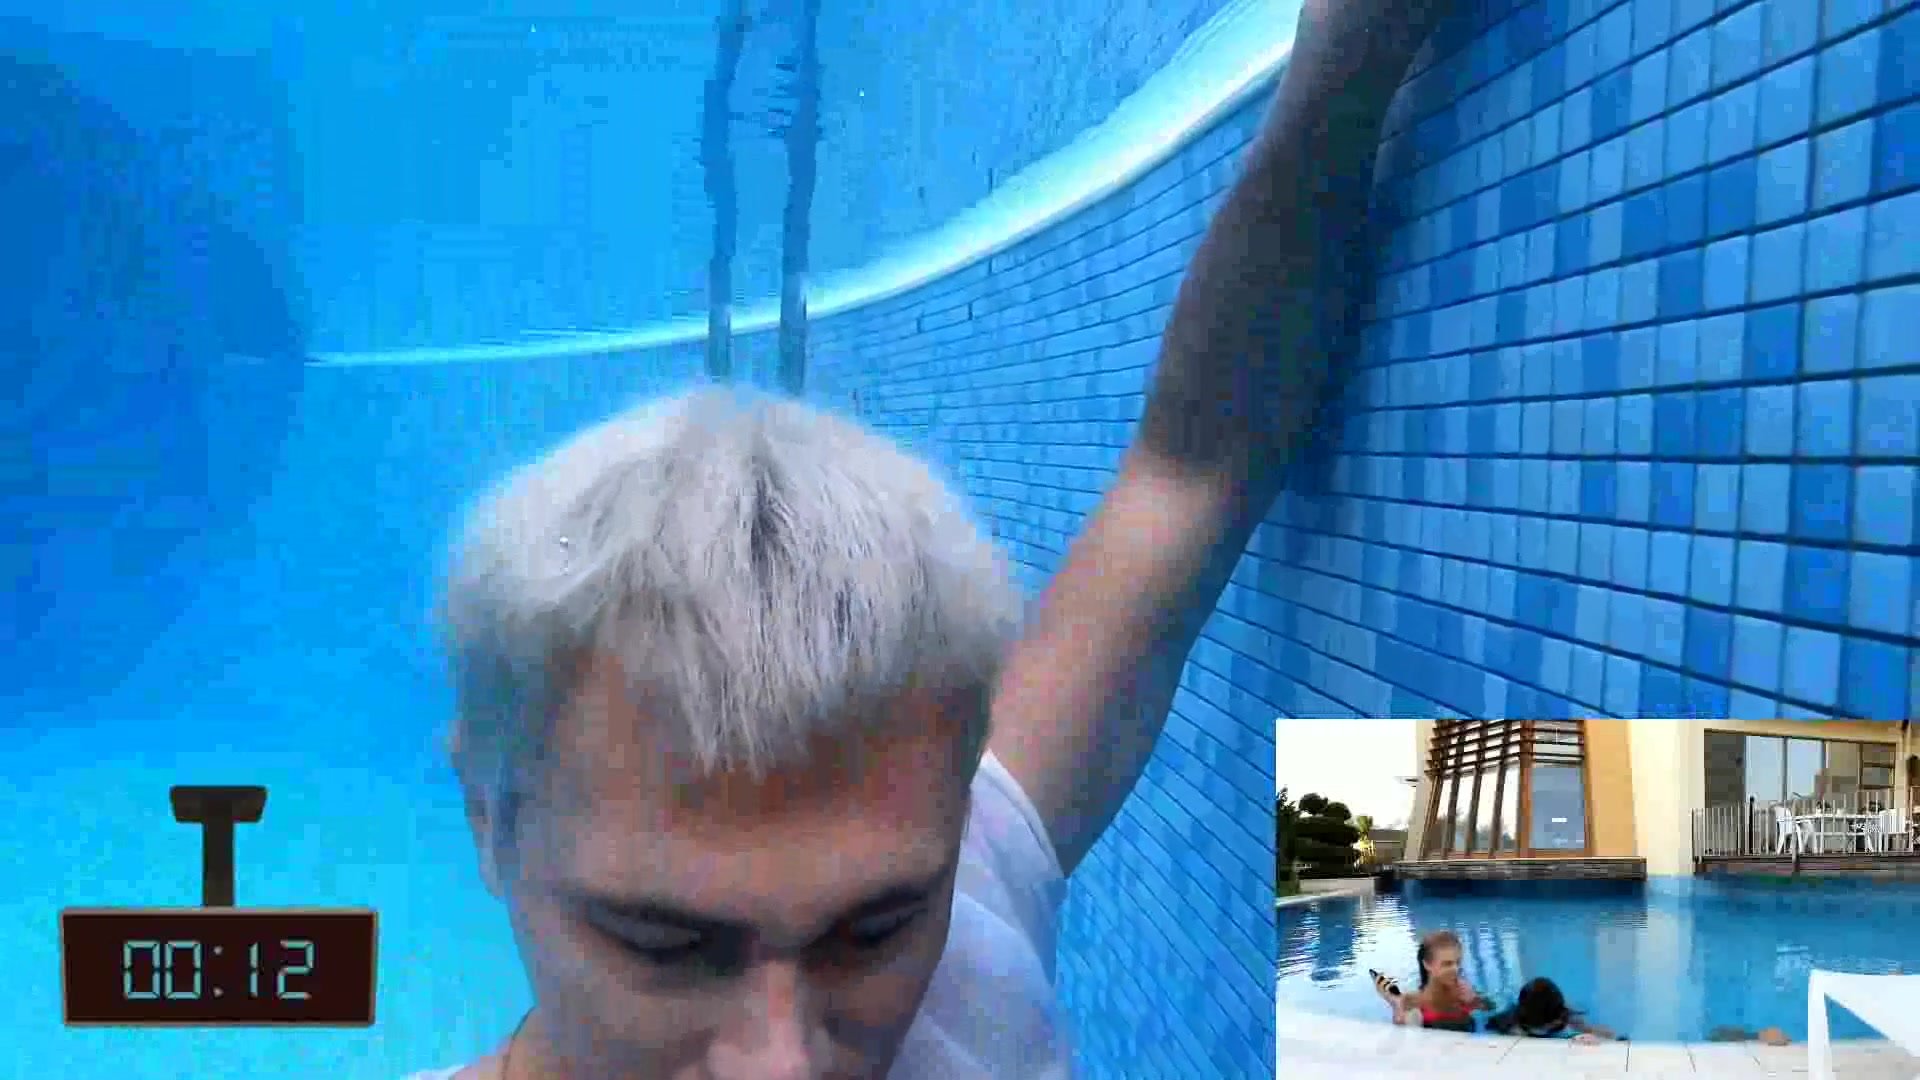 Bleached hair boy breatholds barefaced underwater for half minute